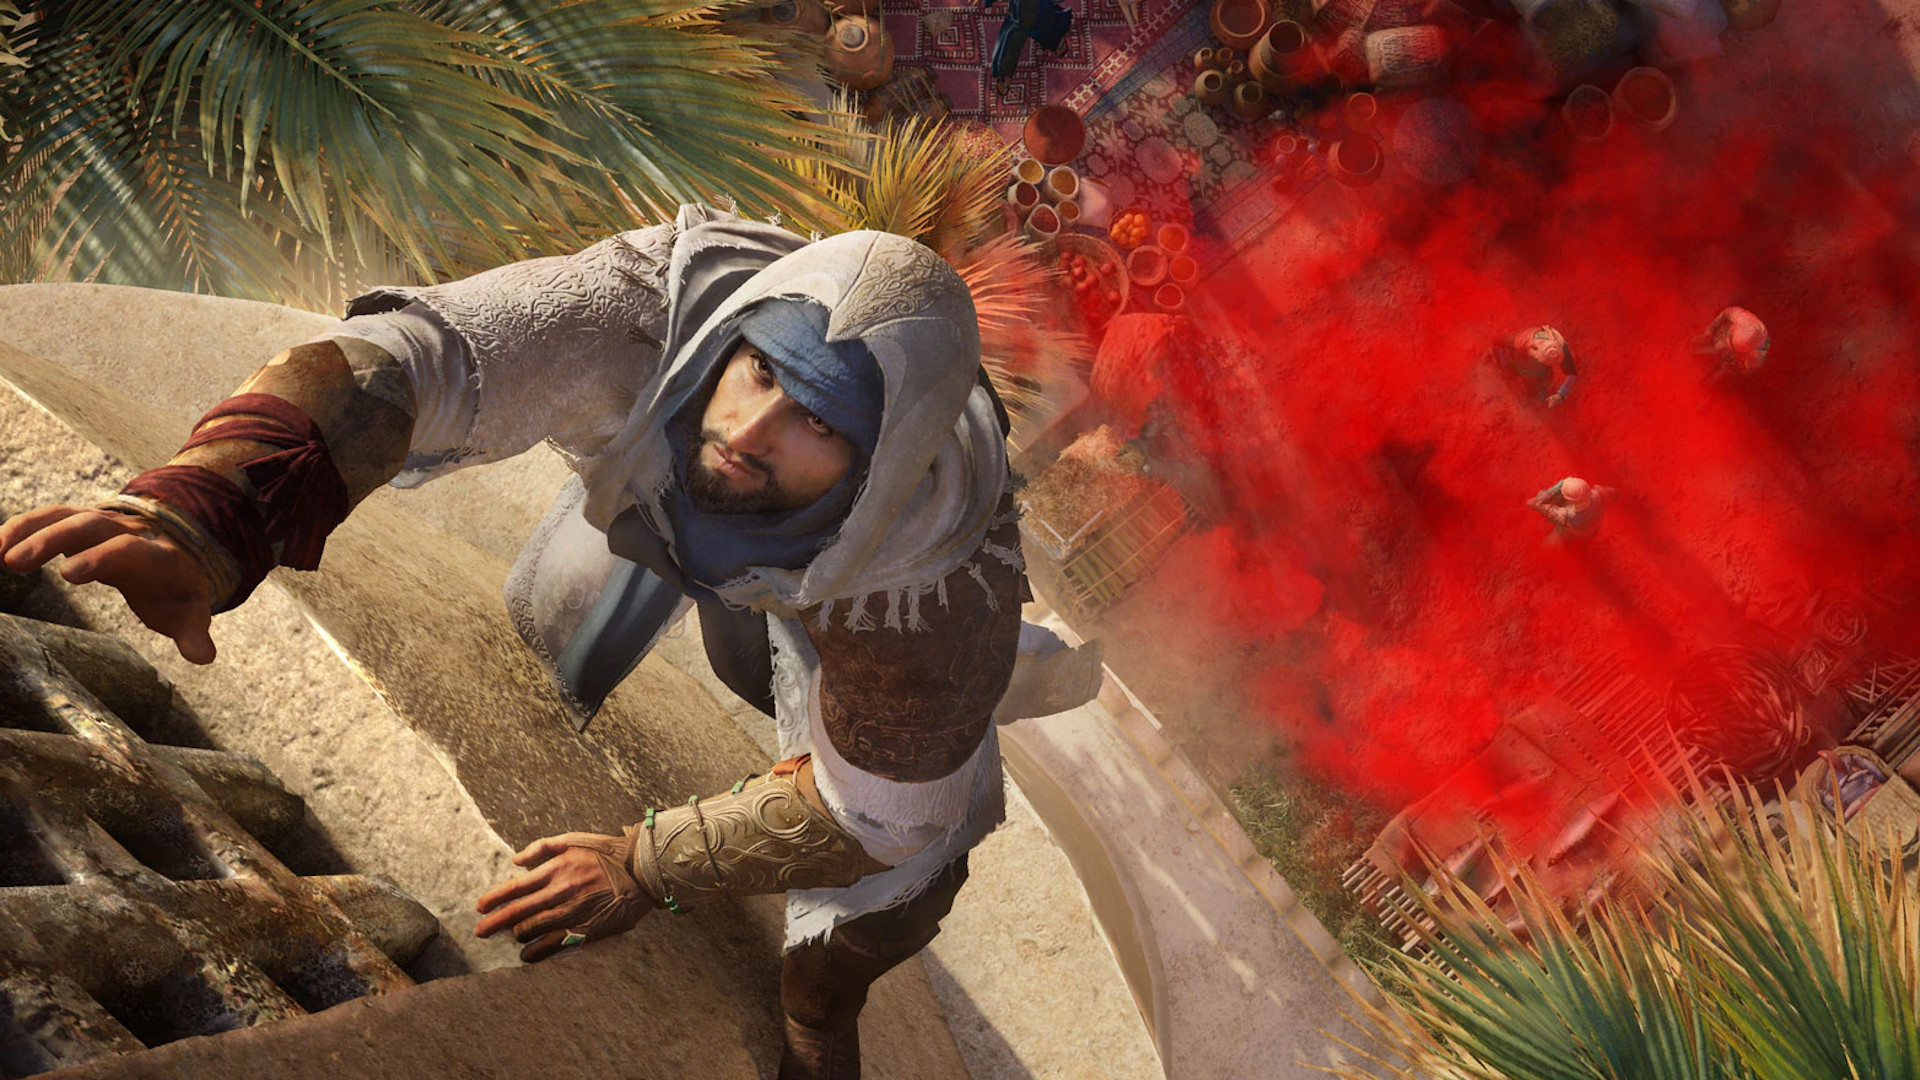 What Assassin's Creed Game Should You Play First?